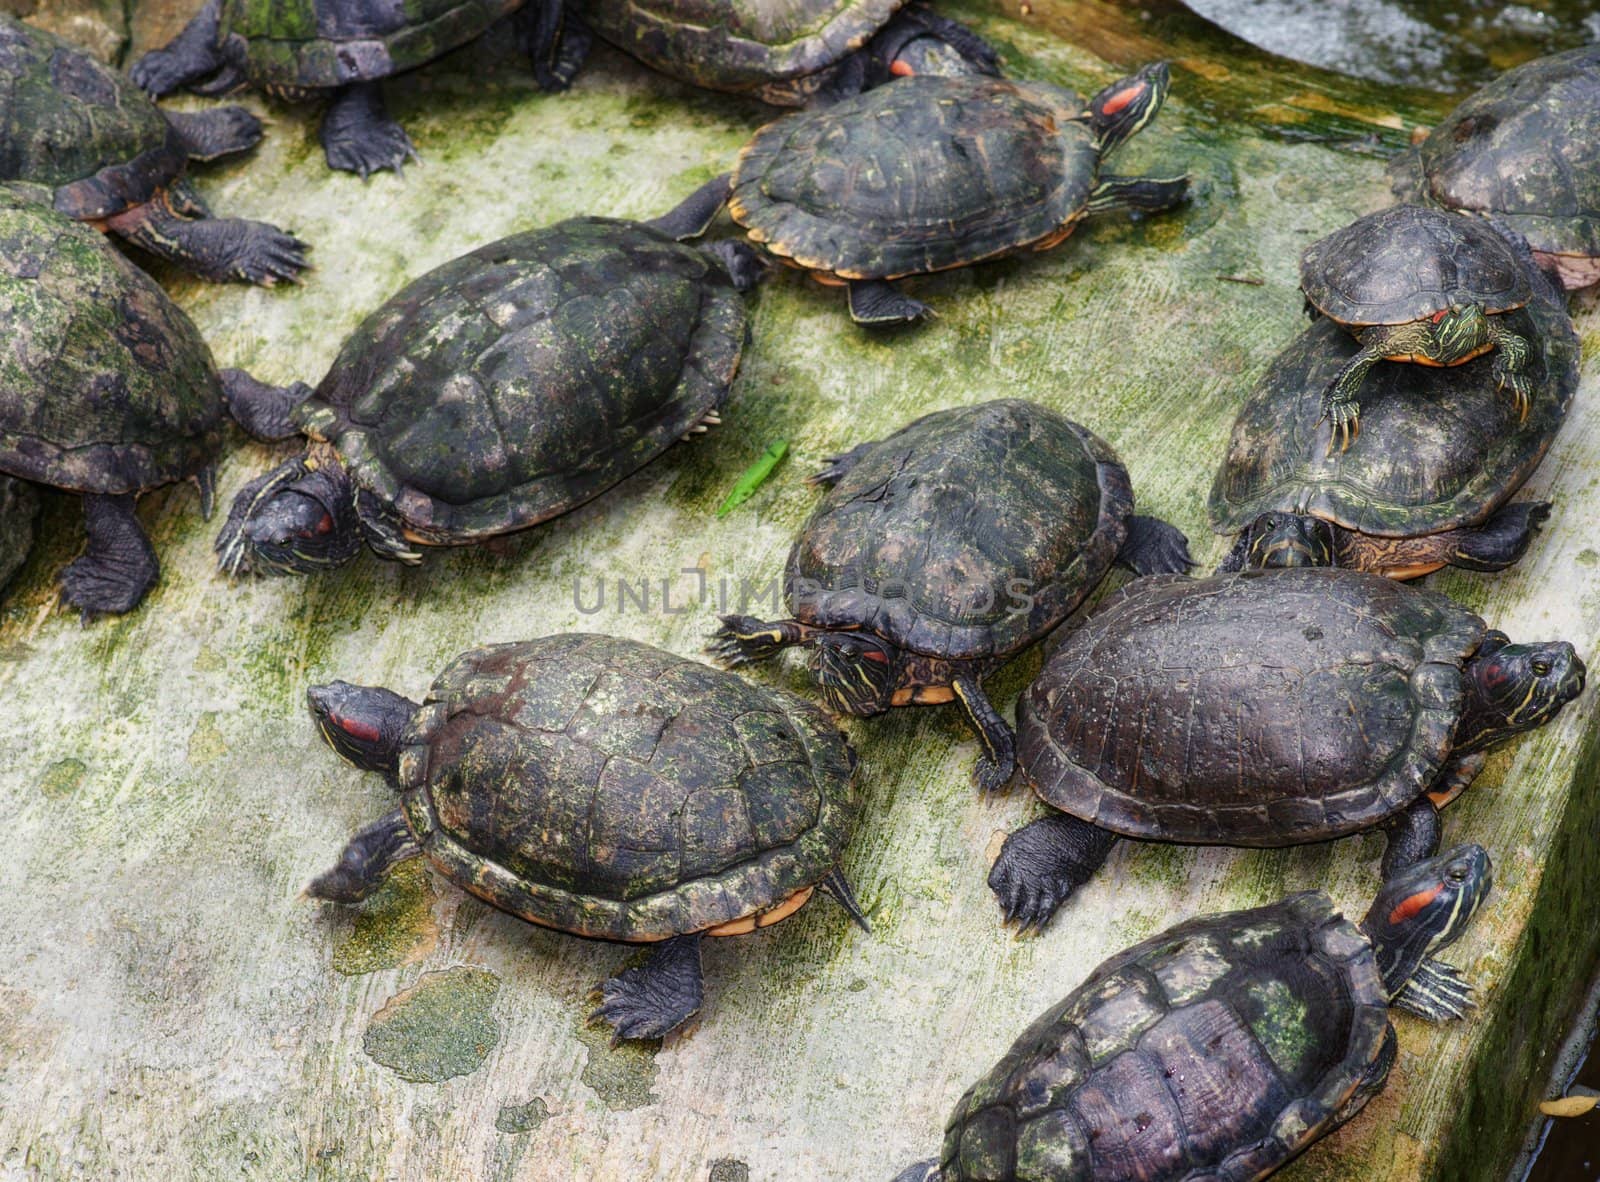 lots of tortoises by clearviewstock